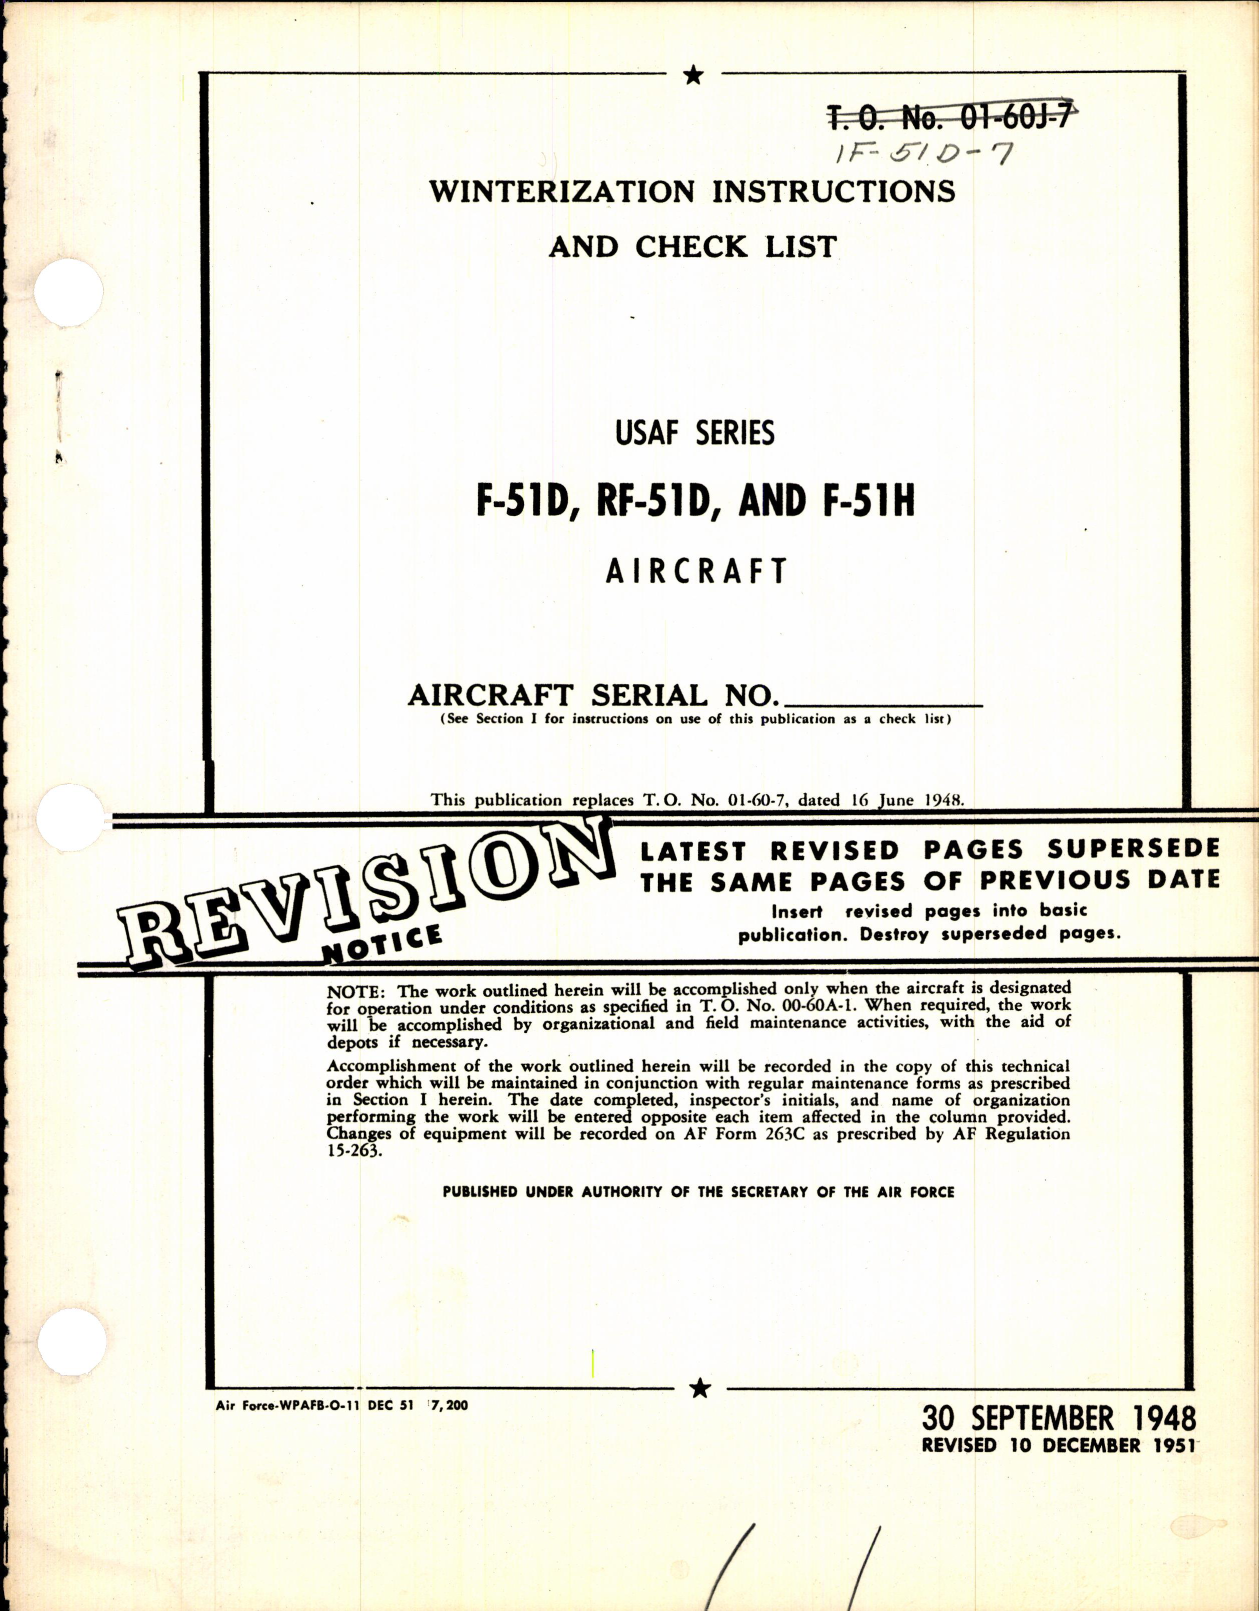 Sample page 1 from AirCorps Library document: Winterization Instructions and Check List for F-51